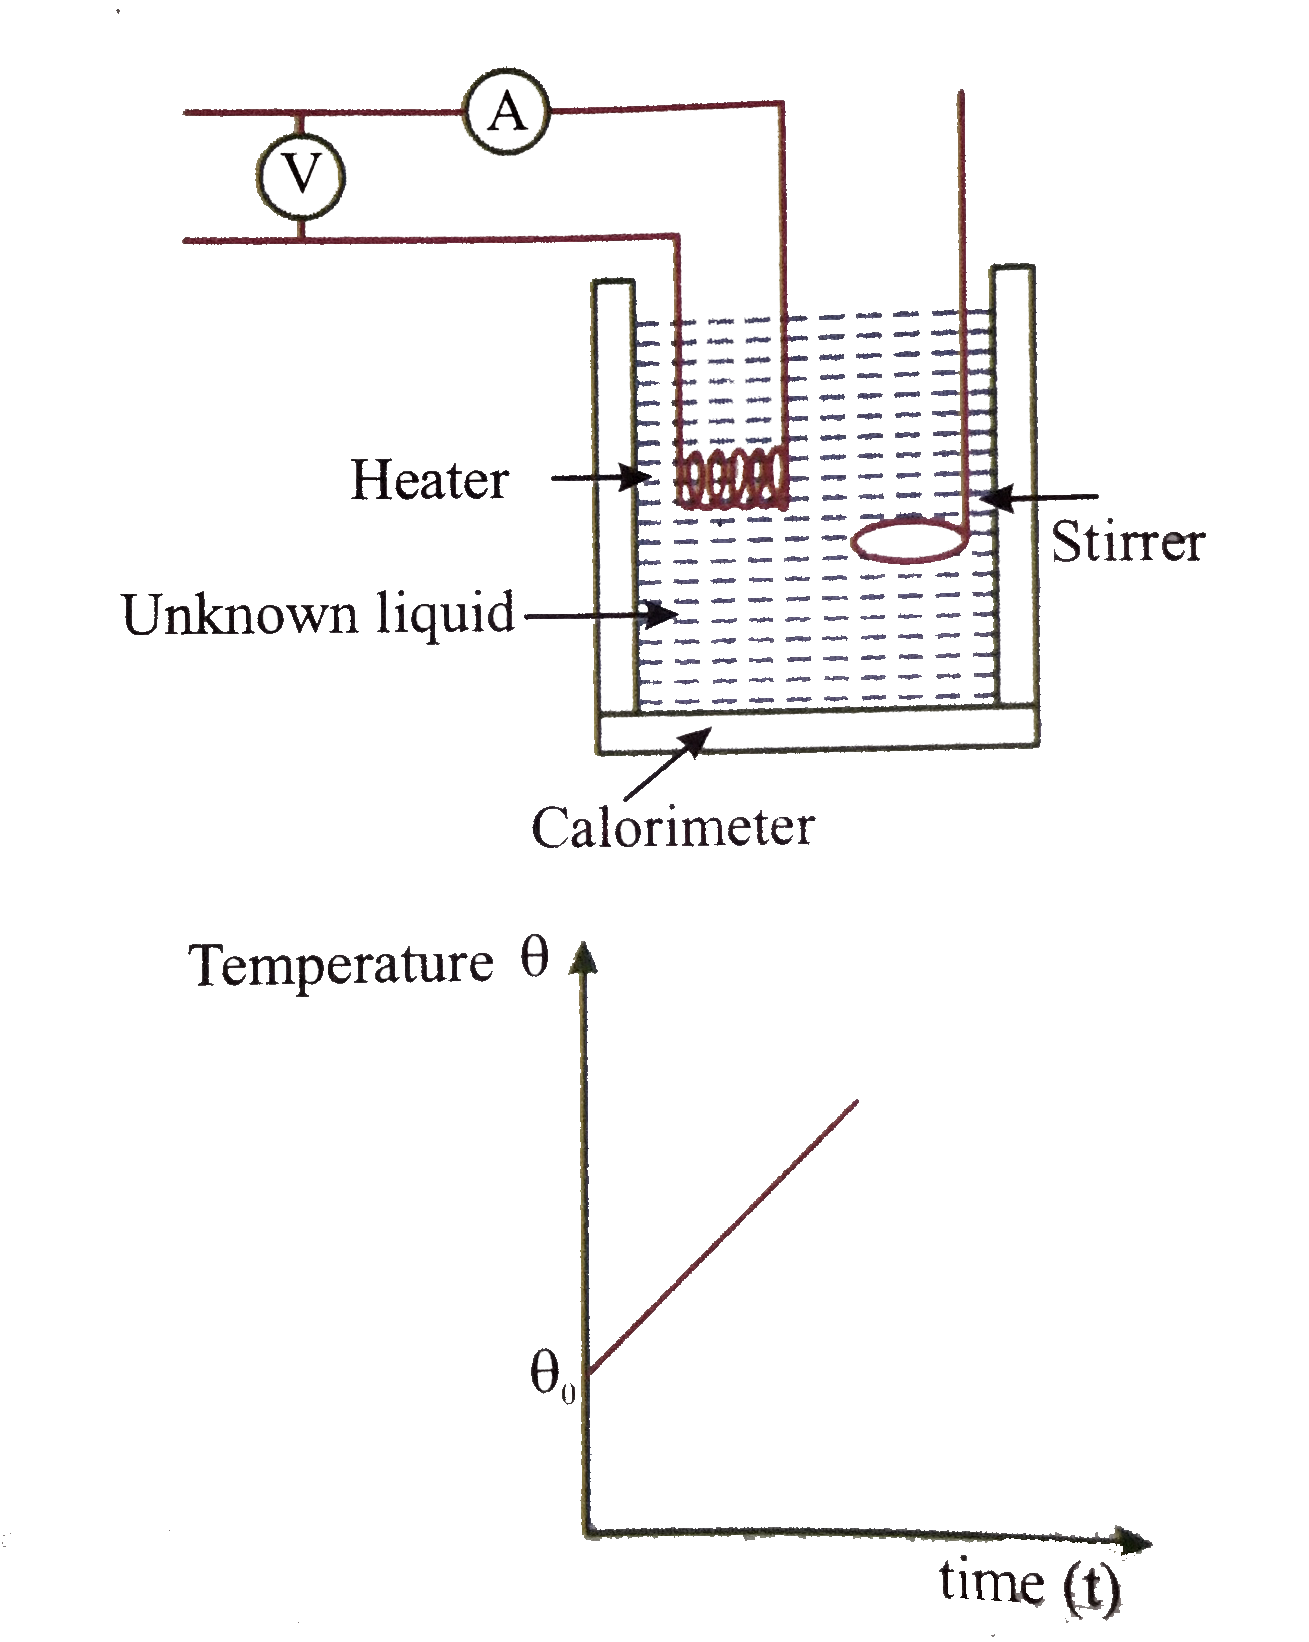 Figure shows an electrical calorimeter to determine specific heat capacity of an unknown liquid, First of all, the mass of empty calorimeter (a copper container) is measured and suppose it is m(1). Then the unknown liquid is poured in it. Now the combined mass of calorimeter+liquid system is measured and let it be m(2). So the mass of liquid is (m(2)-m(1)). Initially both were at room temperature (theta(0)).   Now a heater is immeresed in if for time interval t. The voltage drop across the heater is V and current passing through it is I. Due to heat supplied, the temperature of both the liquid and calorimeter will rise simultaneously. After t sec, heater was switched off, and final temperature is theta(r). If there is no heat loss to surroundings. Heat supplied by the heater=Heat absorbed by the liquid+heat absorbed by the calorimeter (VI)t=(m(2)-m(1))S(1)(theta(f)-theta(0))+m(1)S(c)(theta(f)-theta(0))   The specific heat of the liquid S(1)=(((VI)t)/(theta(f)-theta(0))-m(1)S(c))/((m(2)-m(1)))      Radiation correction: There can be heat loss to environment. To compensate this loss, a correction is introduced.   Let the heater was on for t sec, and then it is switched off. Now the temperature of the mixture falls due to heat loss to environment. The temperature of the mixture is measured t//2 sec. after switching off. Let the fall in temperature during this time is varepsilon   Now the corrected final temperature is taken as theta(f)=theta(f)+varepsilon   If the system were losing heat according to Newton's cooling law, the temperature of the mixture would change with time according to (while heater was on)